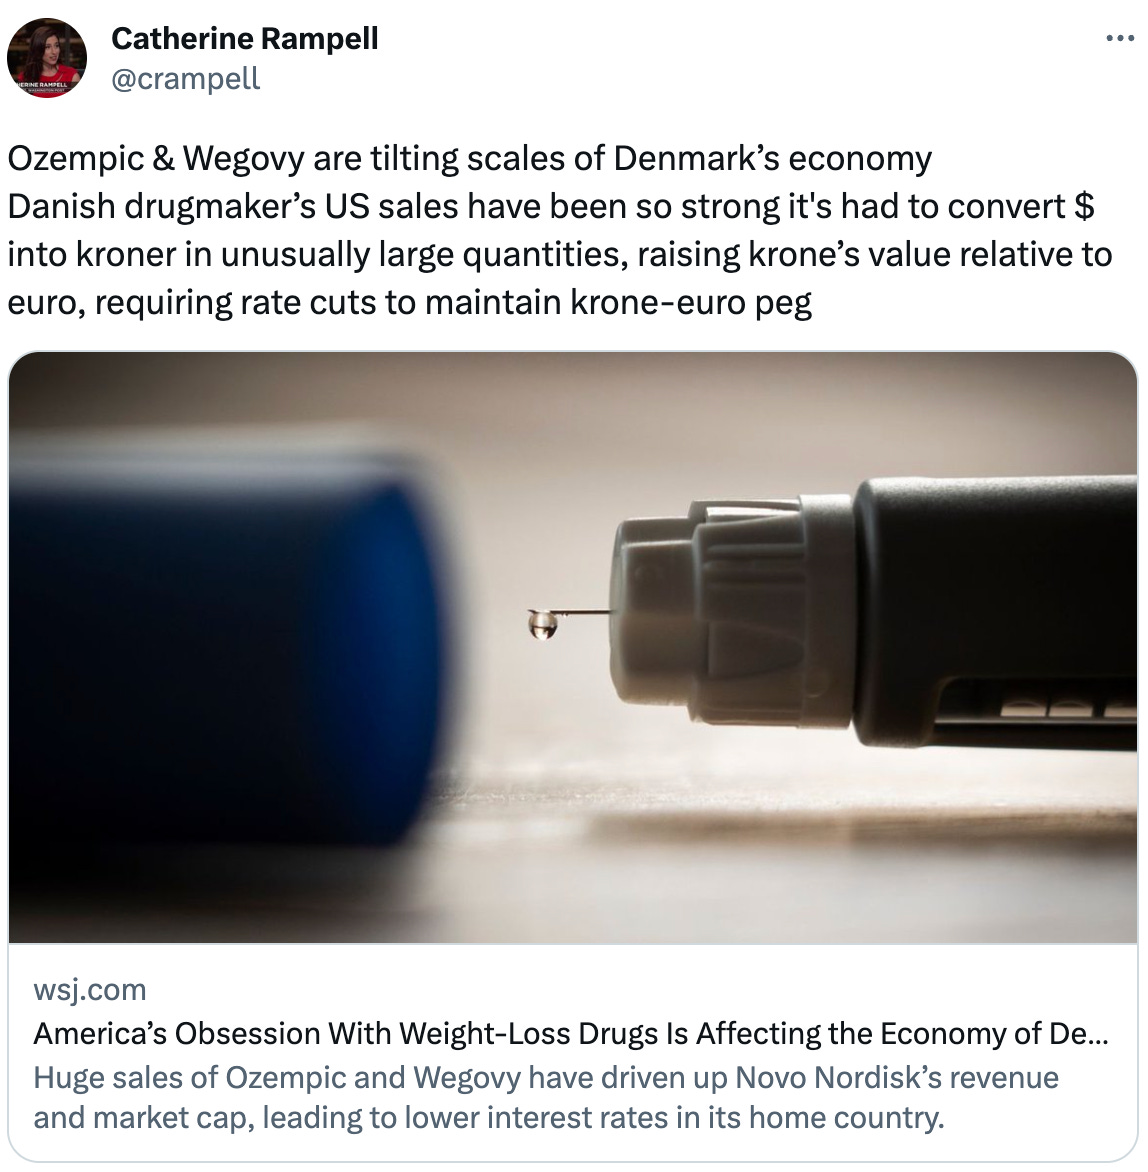  Catherine Rampell @crampell Ozempic & Wegovy are tilting scales of Denmark’s economy Danish drugmaker’s US sales have been so strong it's had to convert $ into kroner in unusually large quantities, raising krone’s value relative to euro, requiring rate cuts to maintain krone-euro peg